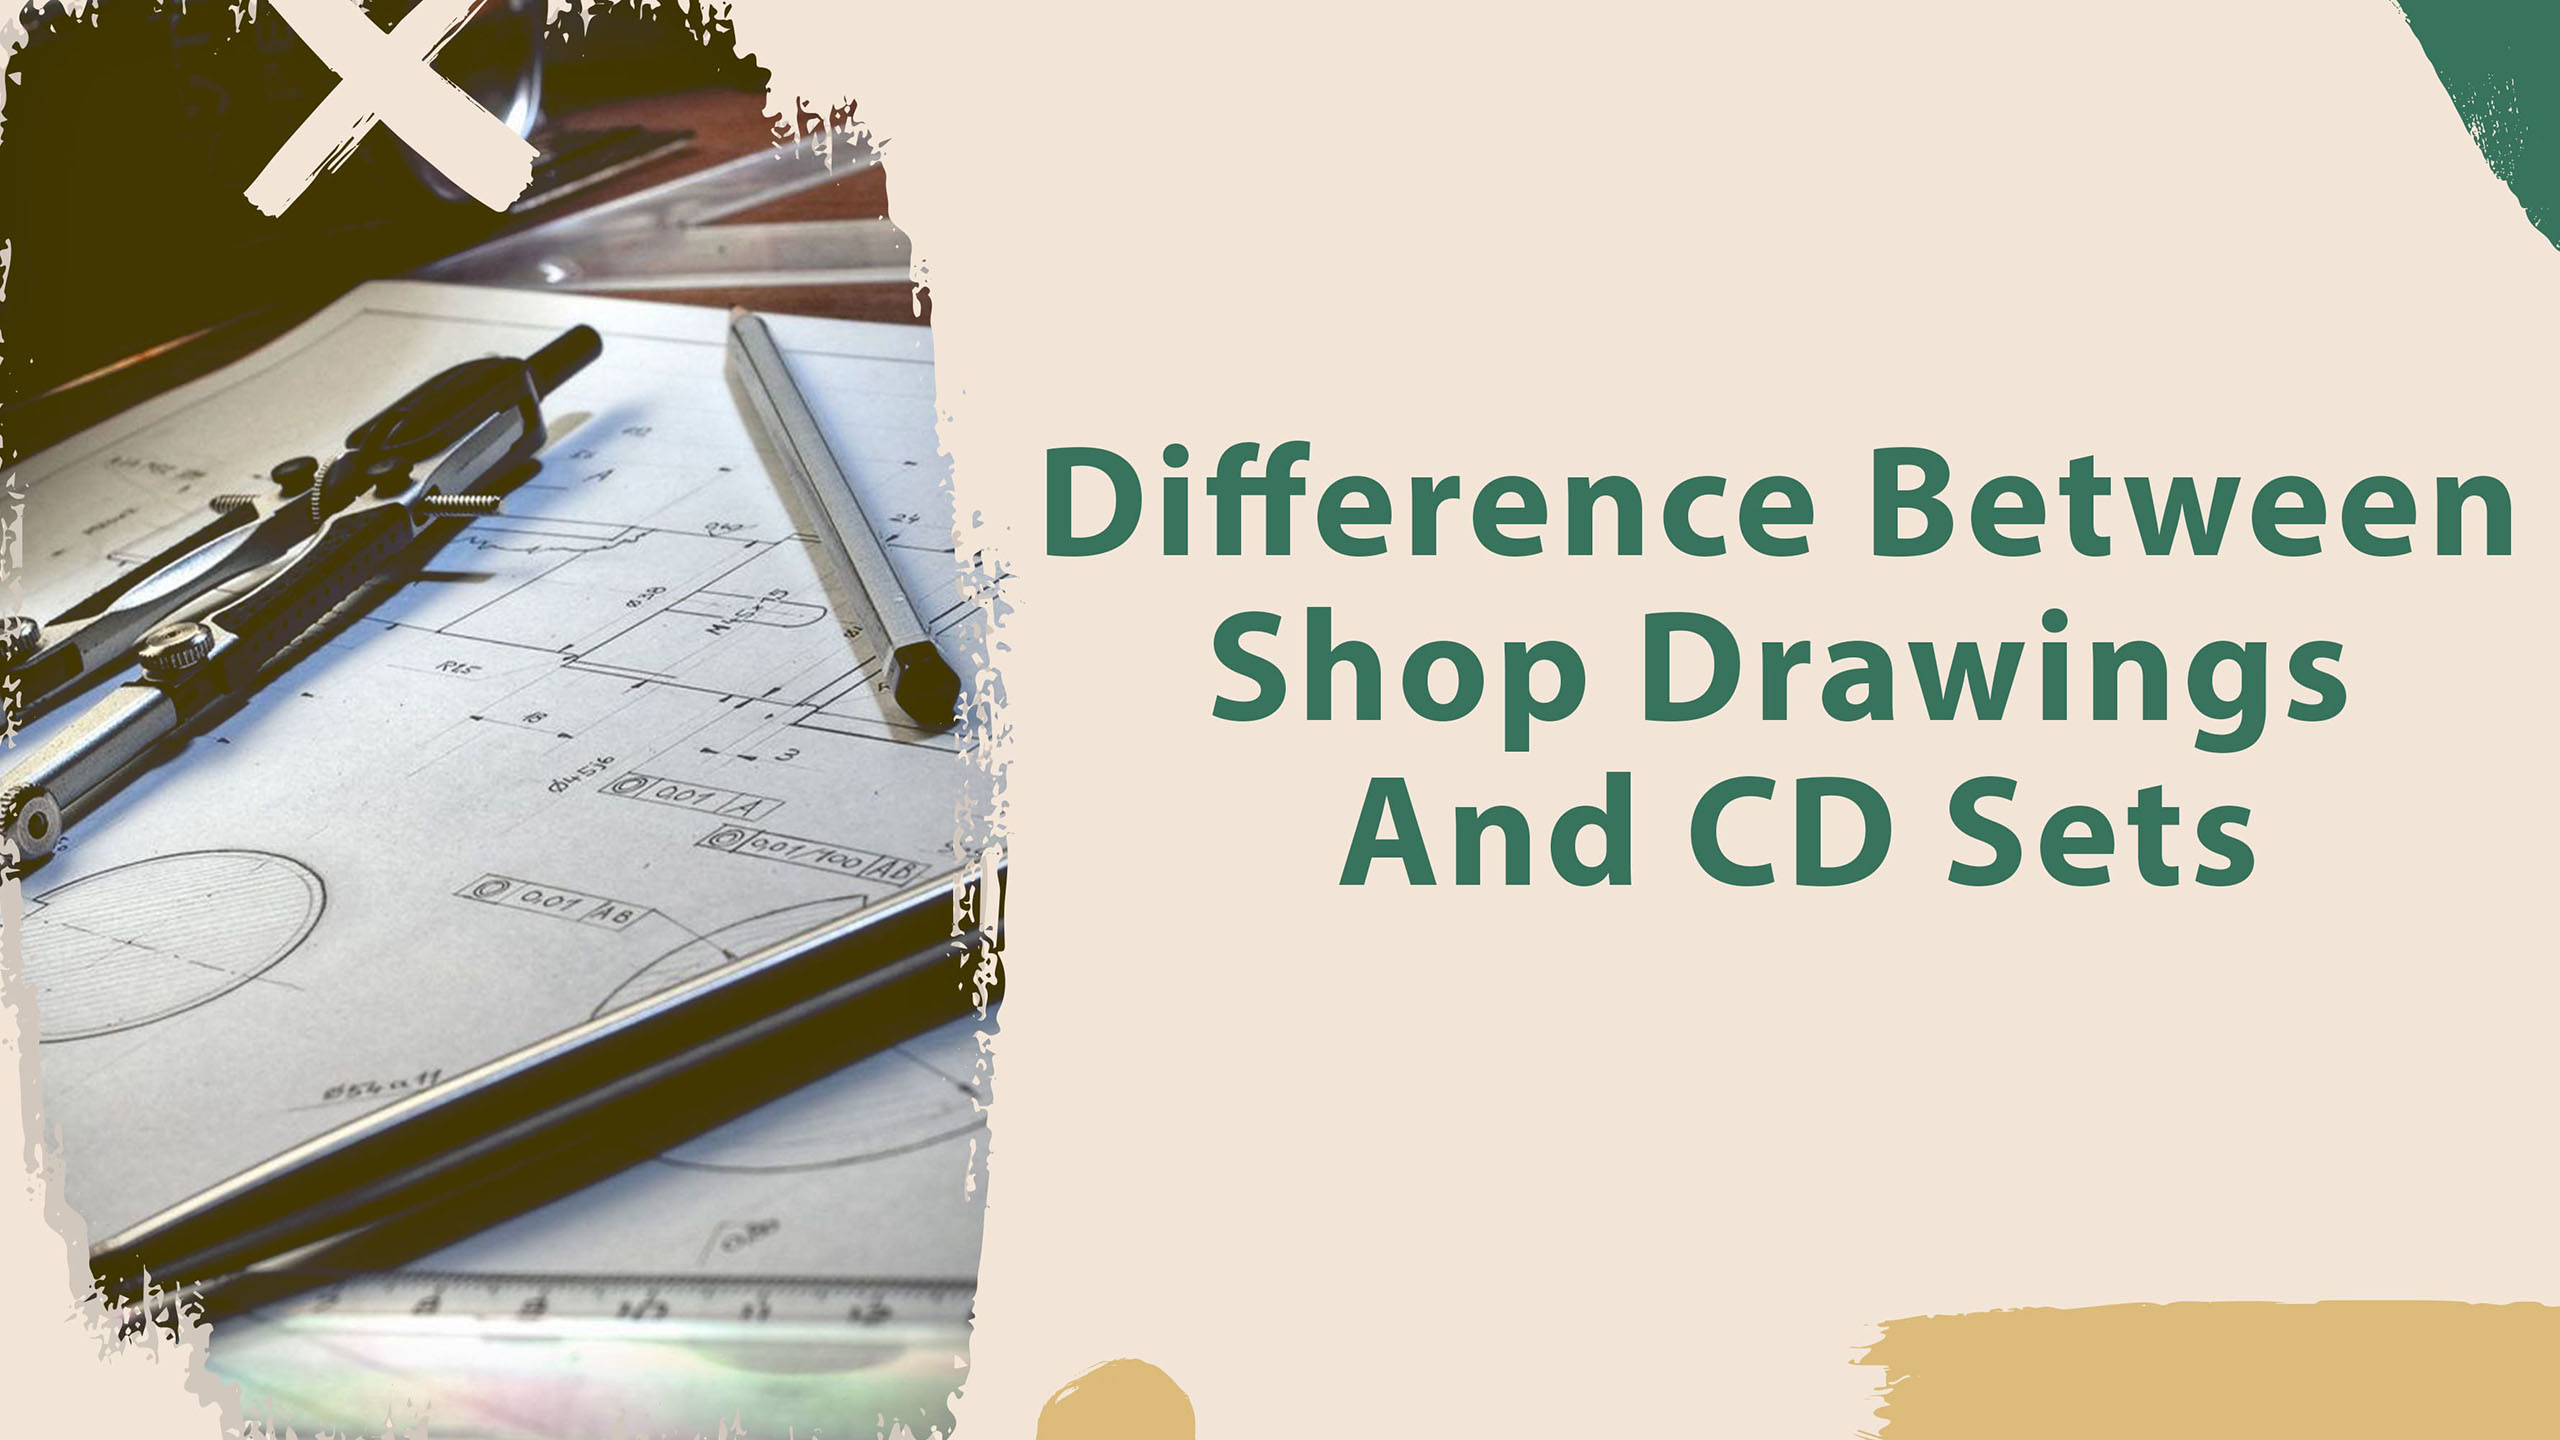 Difference between CD Sets and Shop Drawings